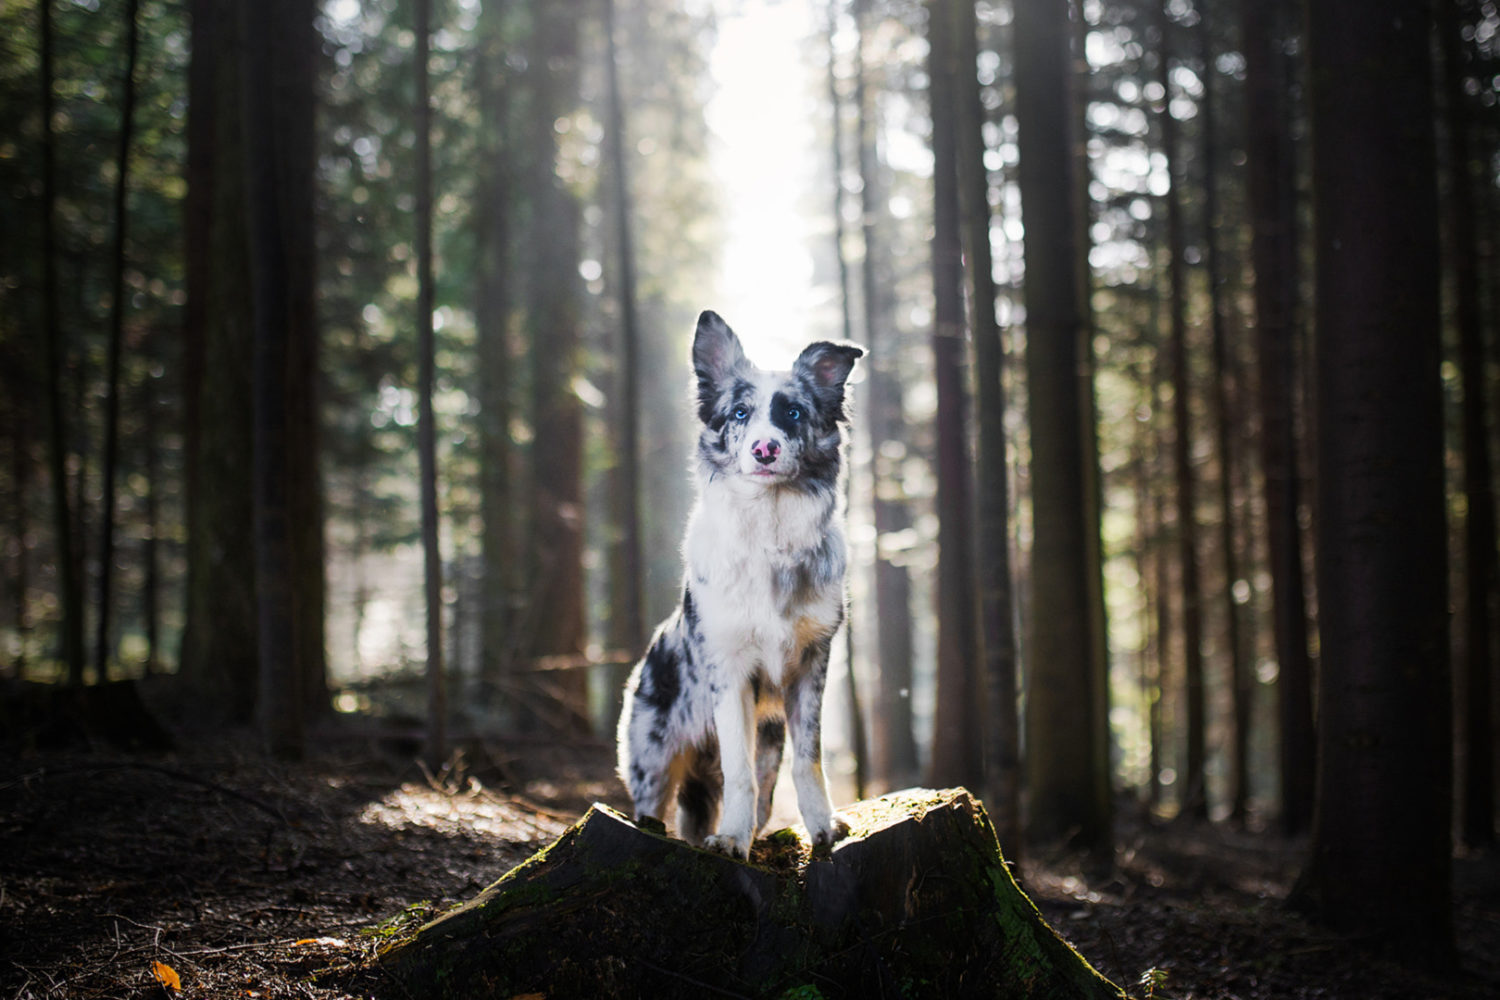 Expert tips to help you take the perfect dog photo